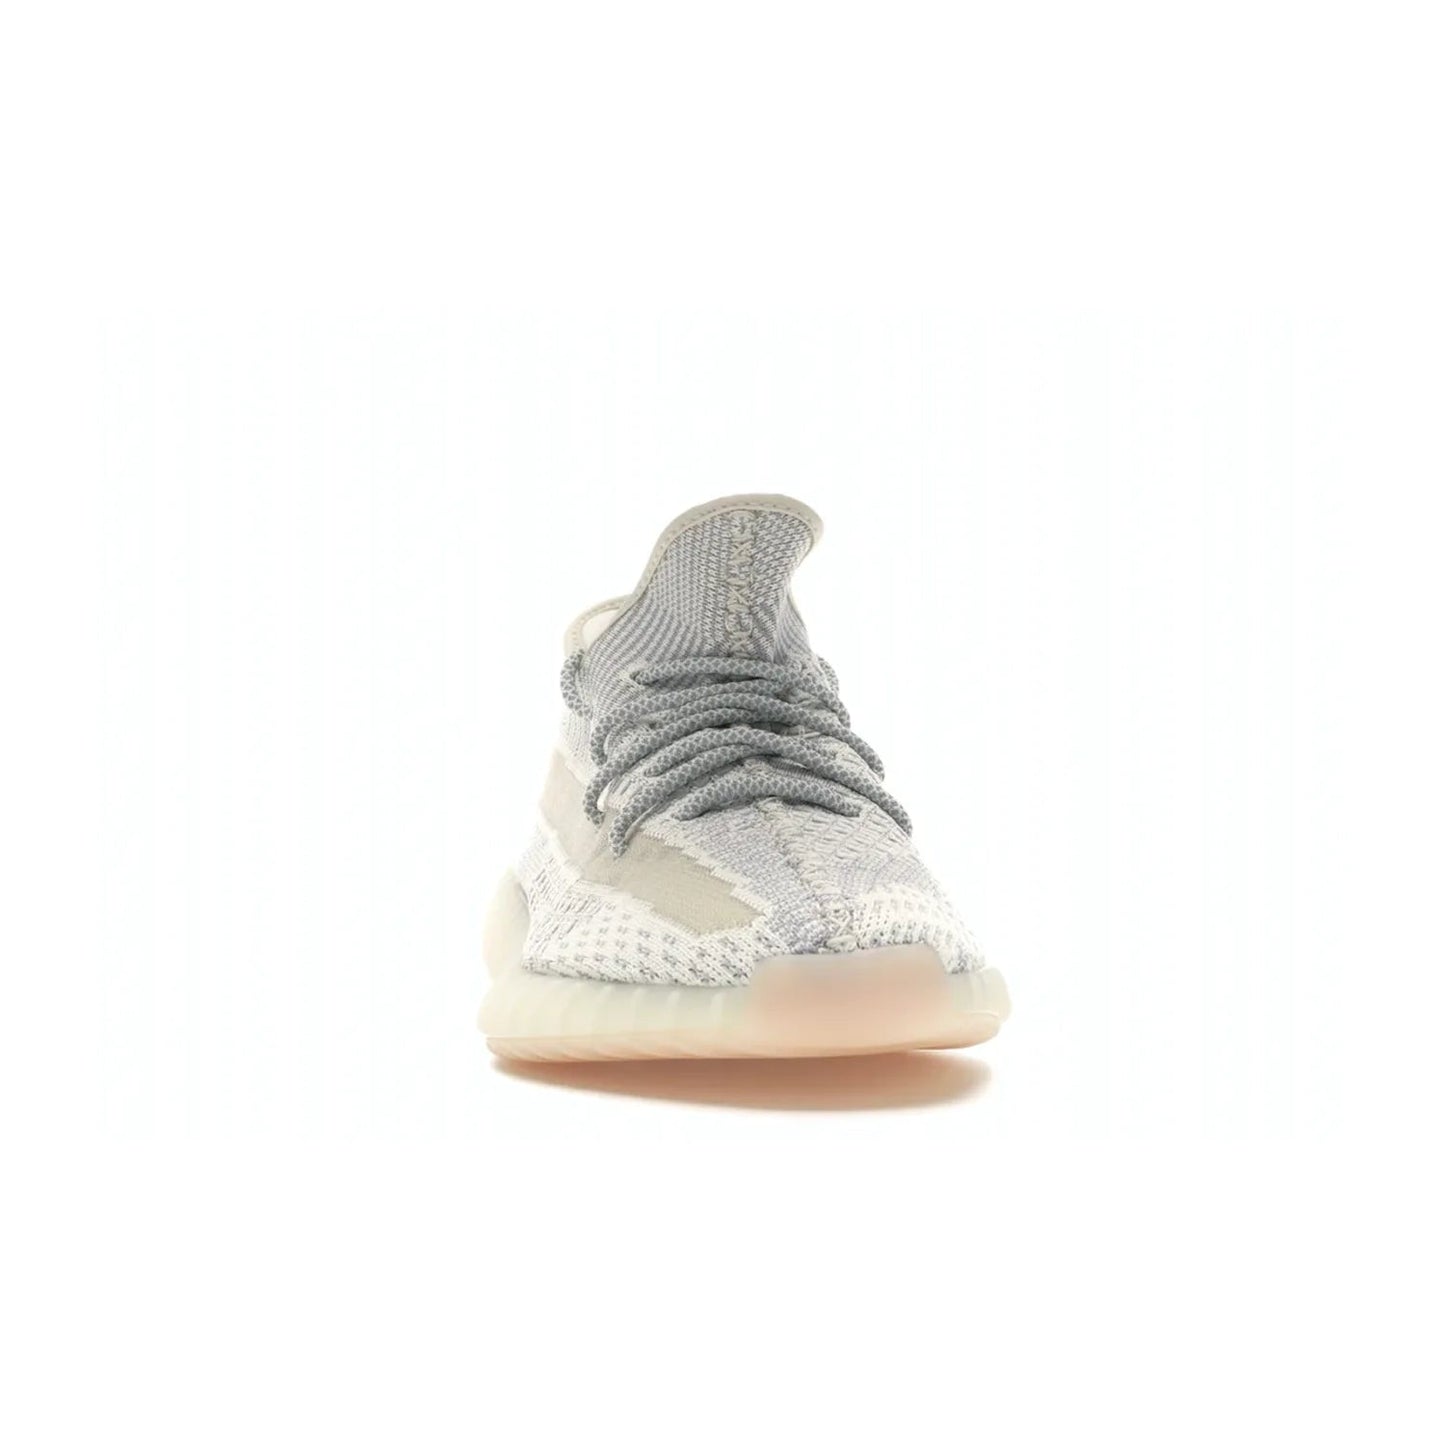 adidas Yeezy Boost 350 V2 Lundmark (Non Reflective) - Image 9 - Only at www.BallersClubKickz.com - Shop the exclusive adidas Yeezy Boost 350 V2 Lundmark with a subtle summer color, mesh upper, white-to-cream transitional midsole, light tan outsole, and pink middle stripe. Comfort and style come together in this perfect summer 350 V2. Released on July 11, 2019.